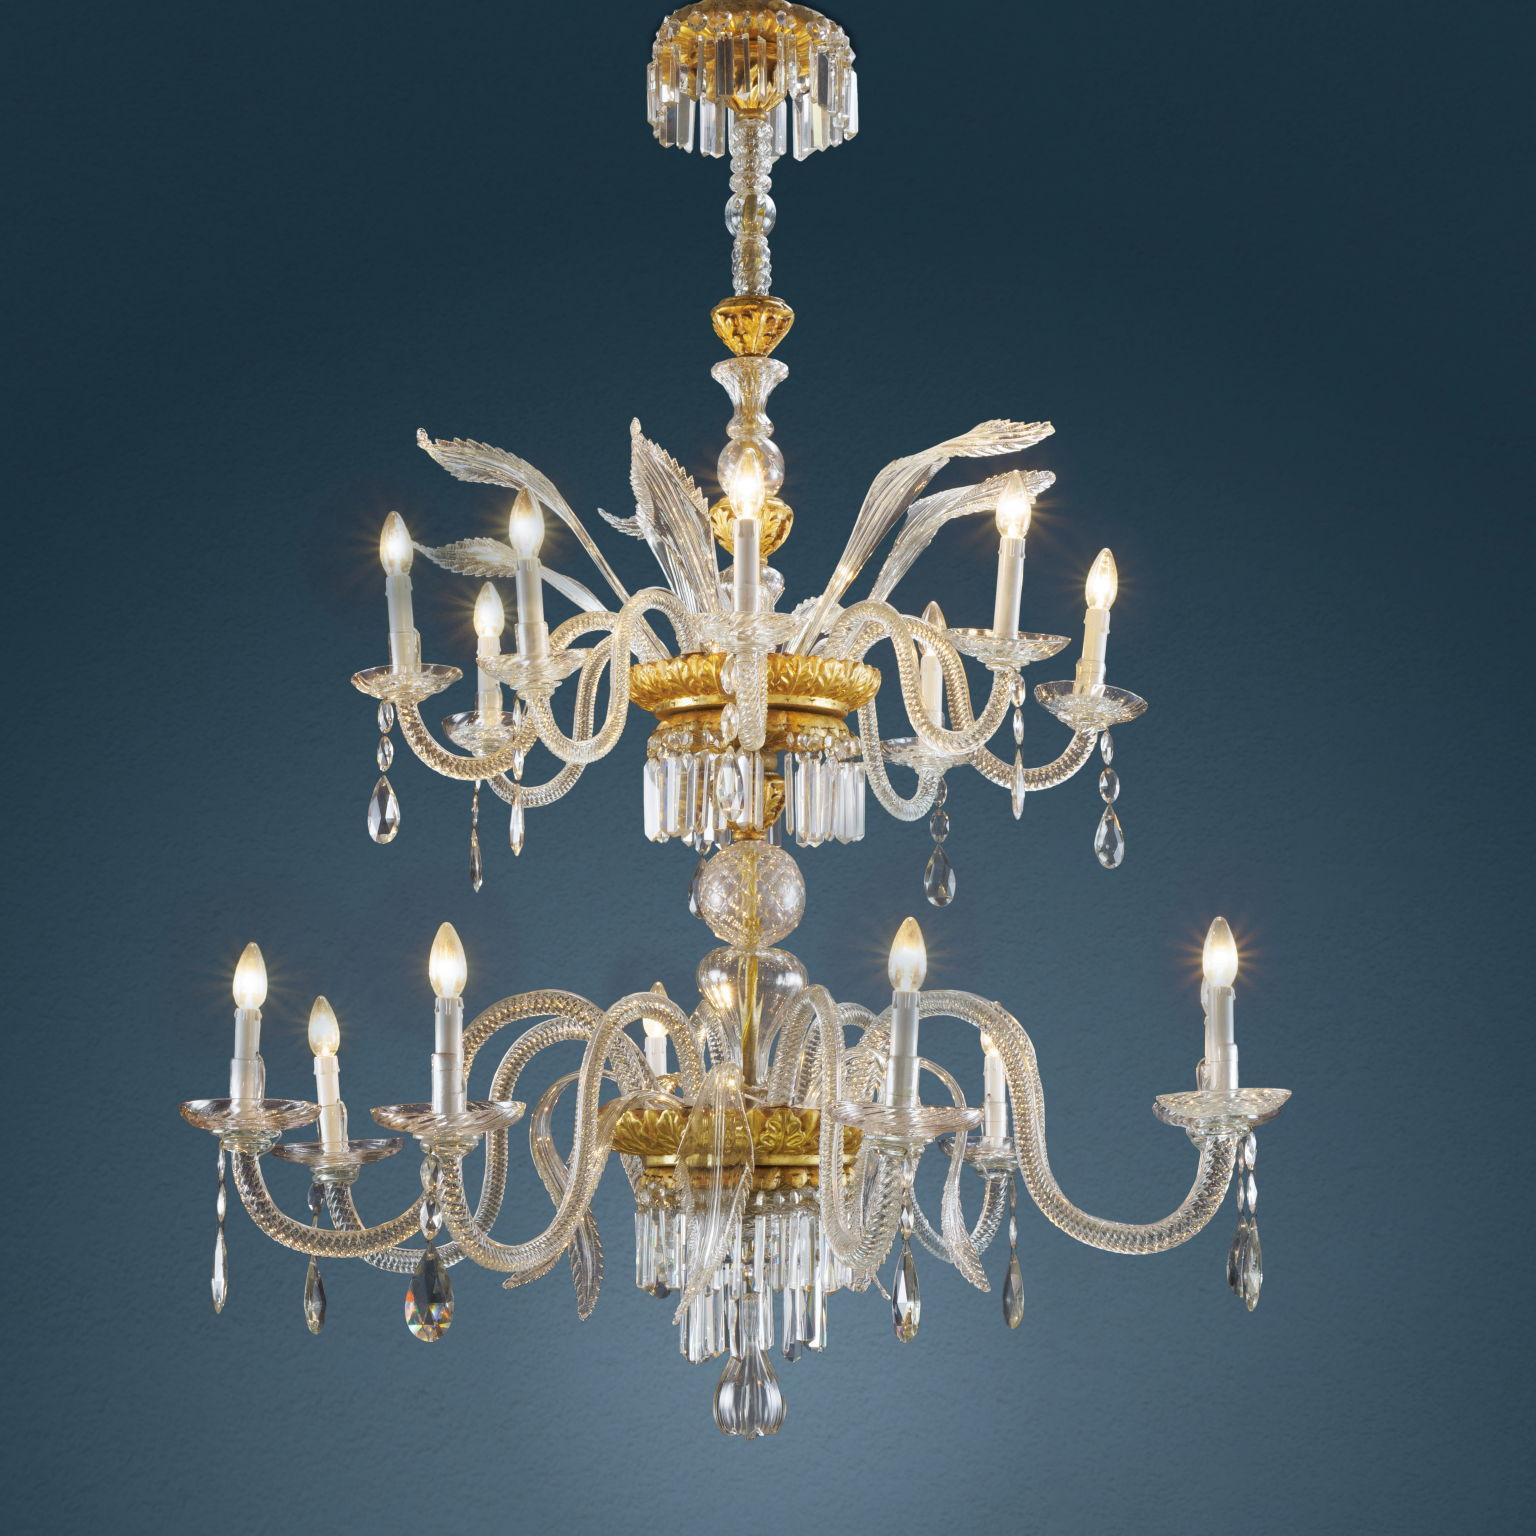 Large Florentine chandelier with 16 lights distributed in double order, dating from the early 19th century. Supported centrally by an iron rod covered with transparent blown glass in different workmanships and interspersed with wooden elements